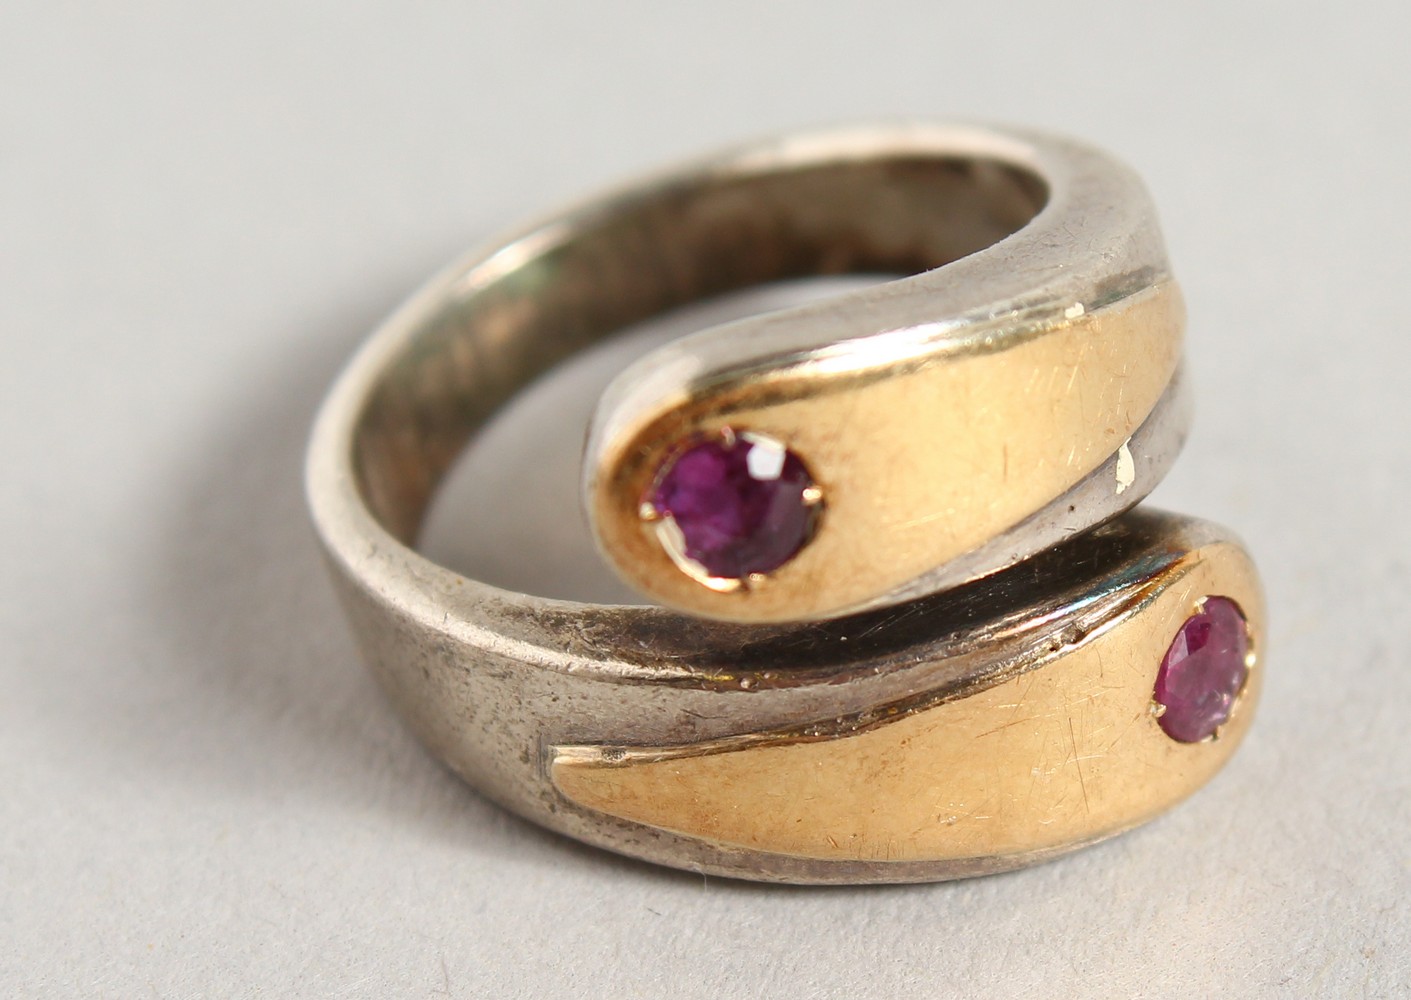 A STYLISH SILVER AND GOLD RING, set with two rubies. - Image 2 of 7